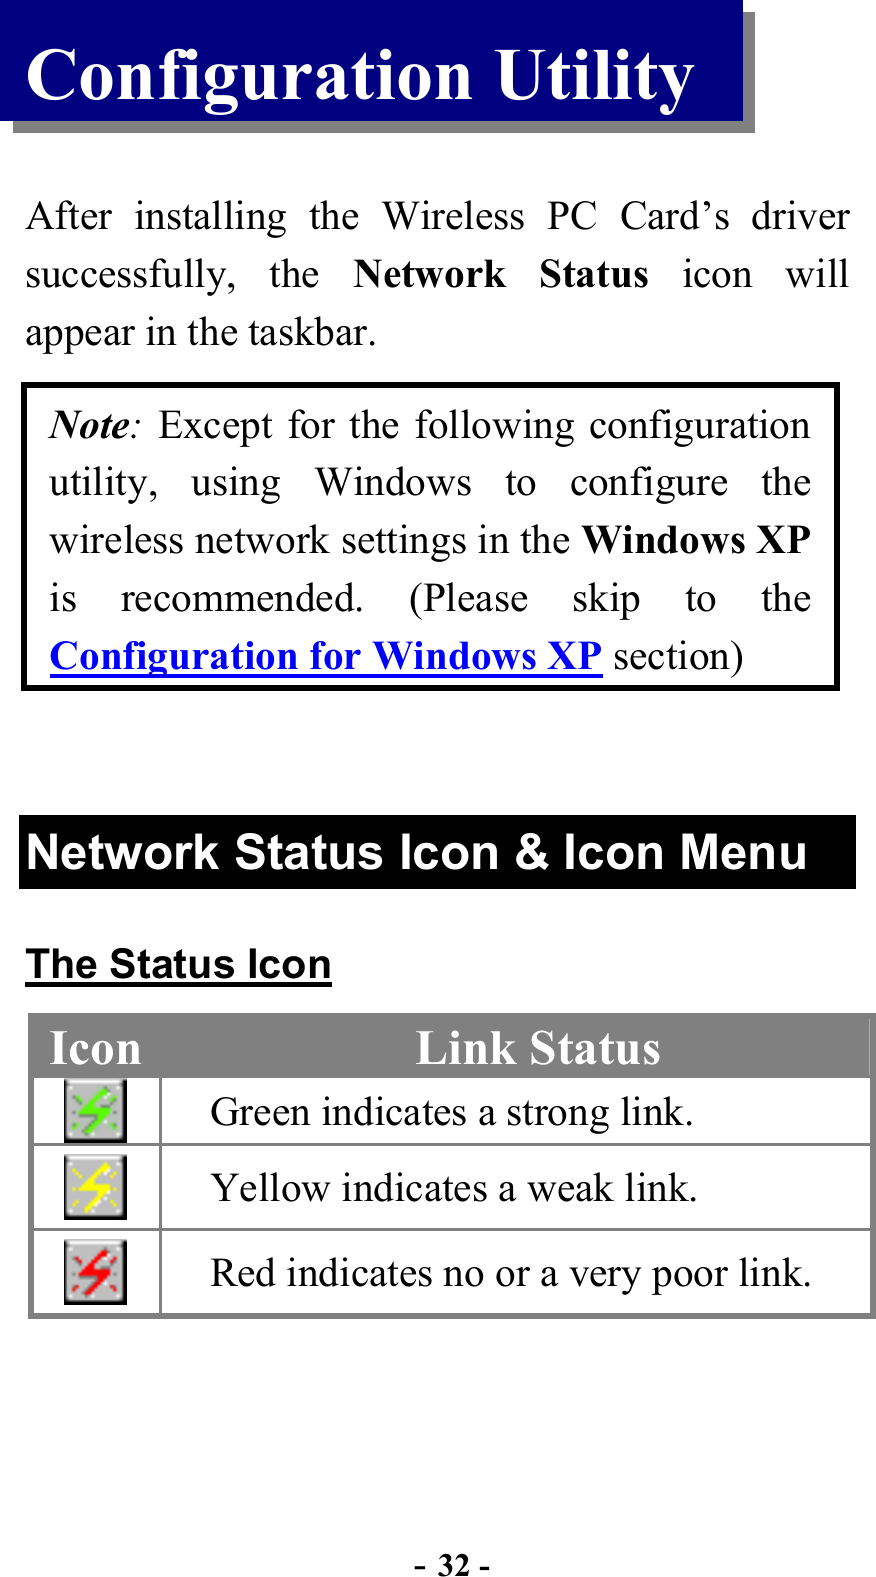  - 32 - Configuration Utility  After installing the Wireless PC Card’s driver successfully, the Network Status icon will appear in the taskbar. Note: Except for the following configuration utility, using Windows to configure the wireless network settings in the Windows XP is recommended. (Please skip to the Configuration for Windows XP section)  Network Status Icon &amp; Icon Menu The Status Icon Icon  Link Status  Green indicates a strong link.  Yellow indicates a weak link.  Red indicates no or a very poor link.  